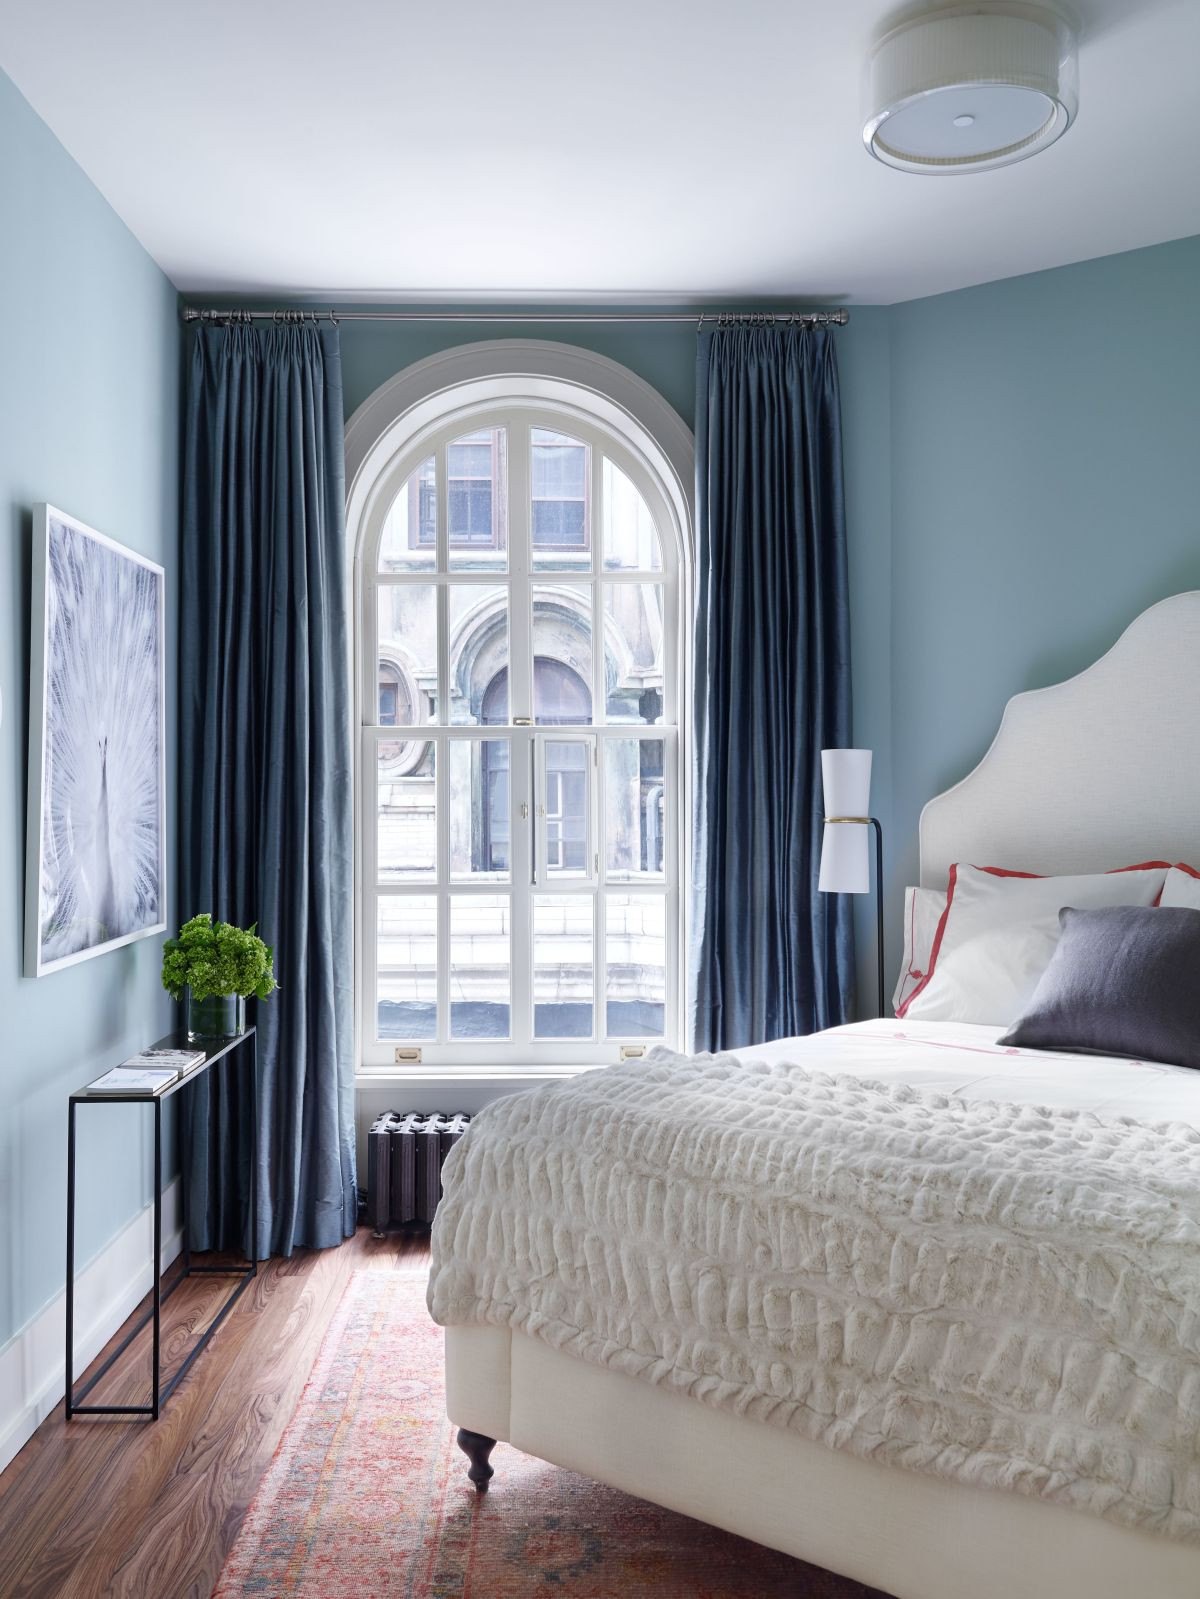 Bedroom Wall Colors
 The Four Best Paint Colors For Bedrooms